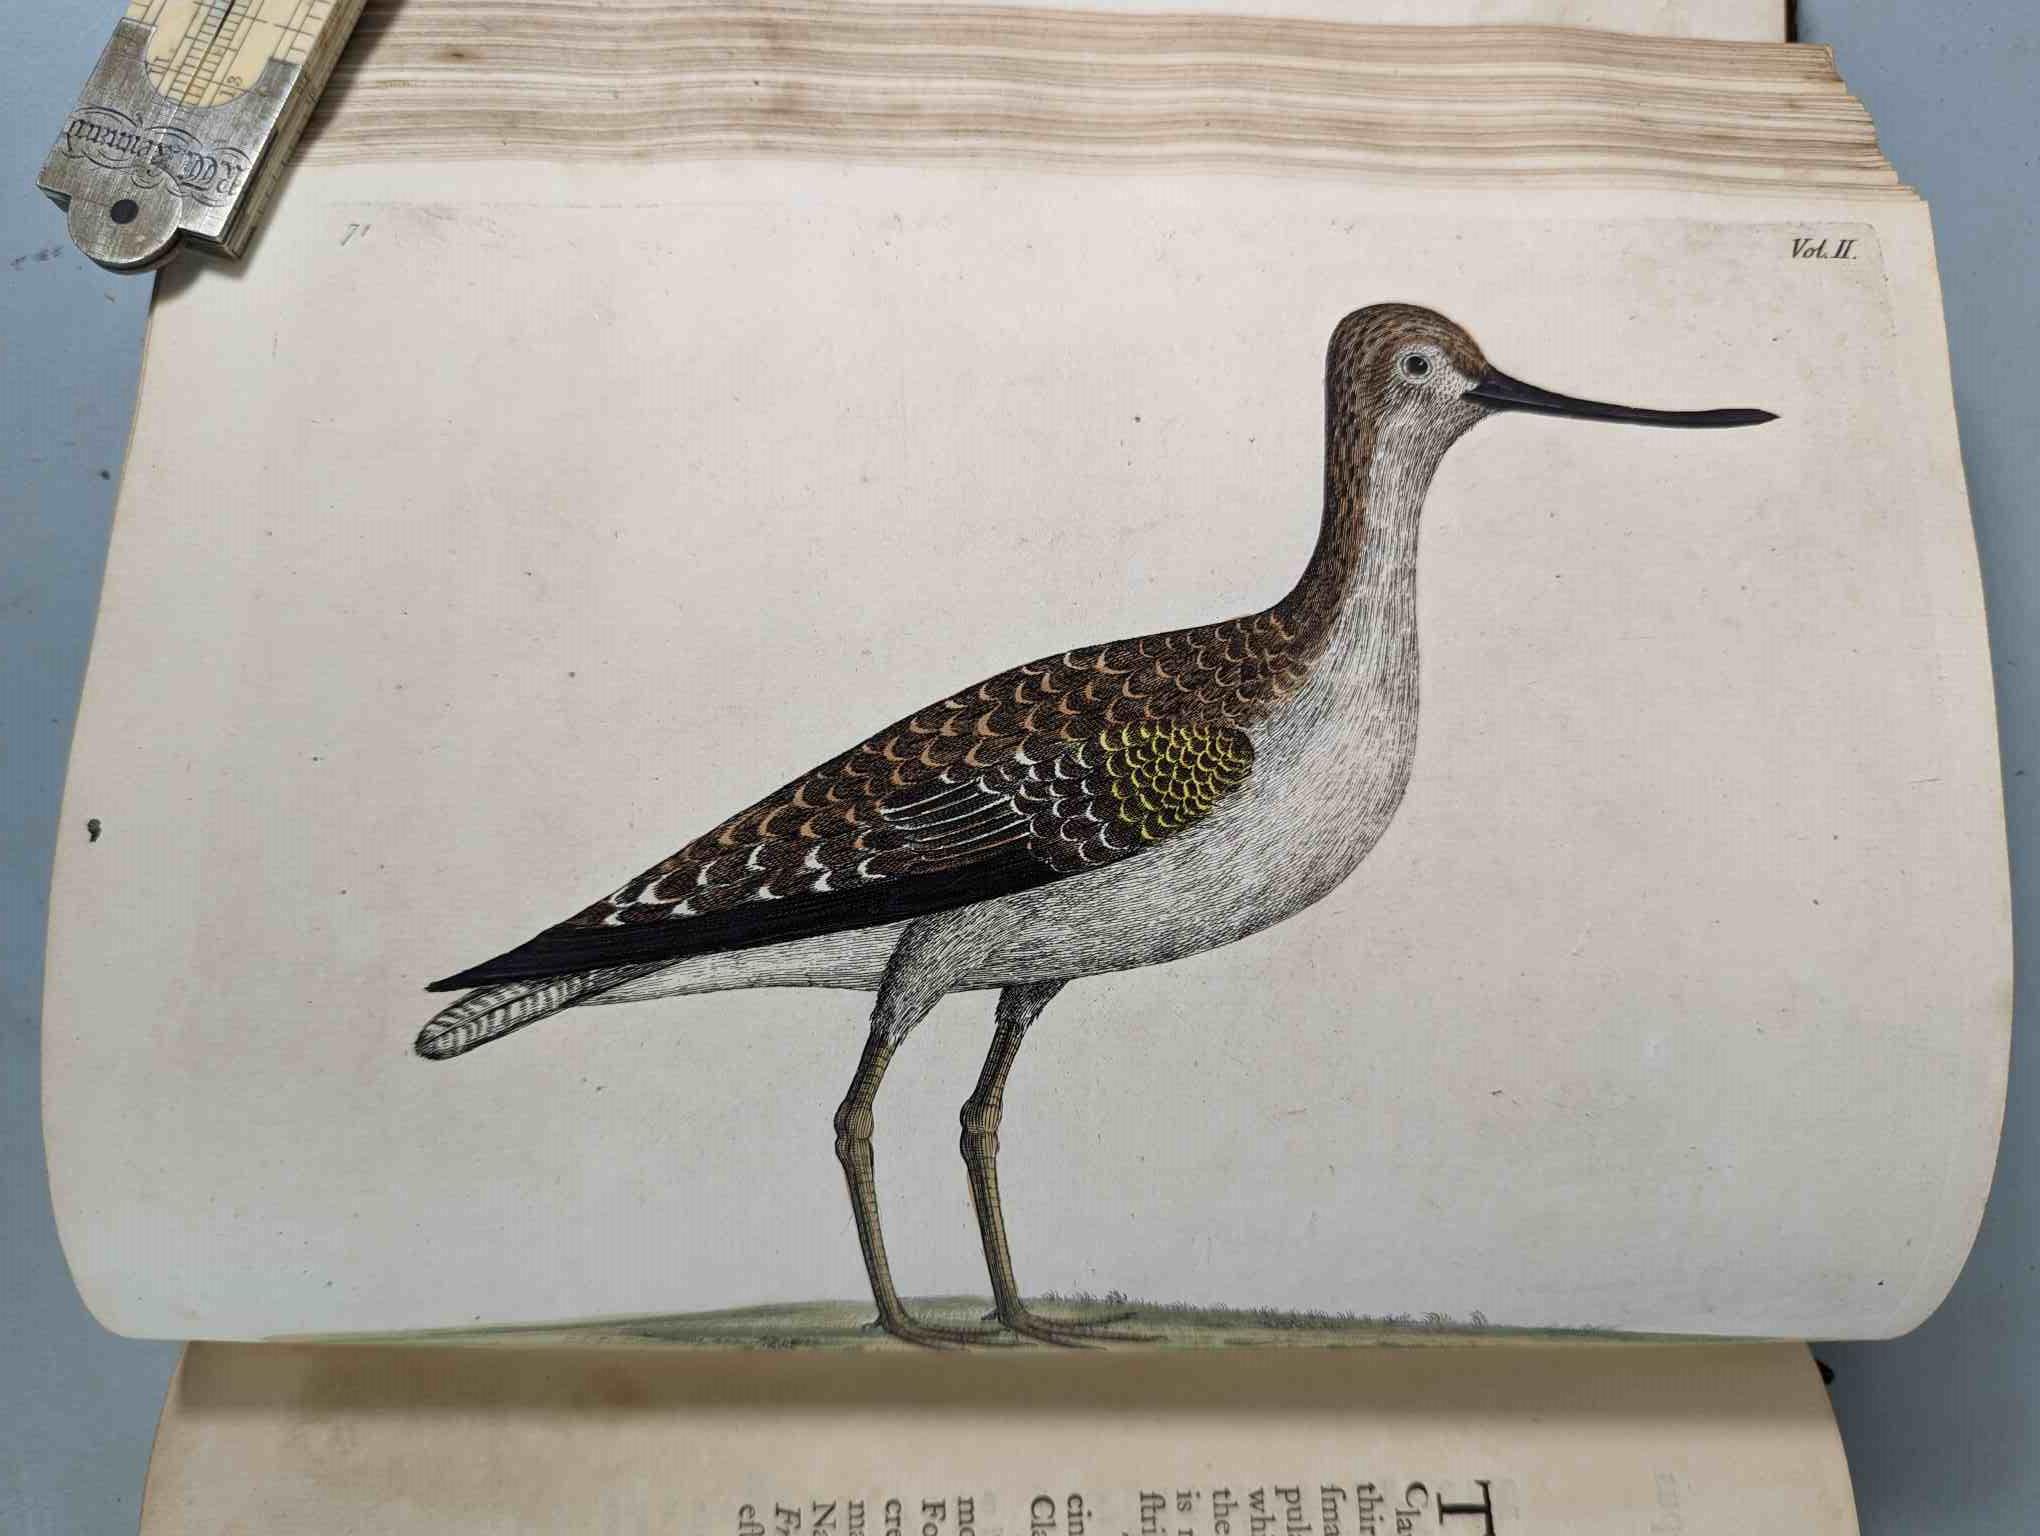 ALBIN, Eleazar. A Natural History of Birds, to which are added, Notes and Observations by W. - Image 175 of 208